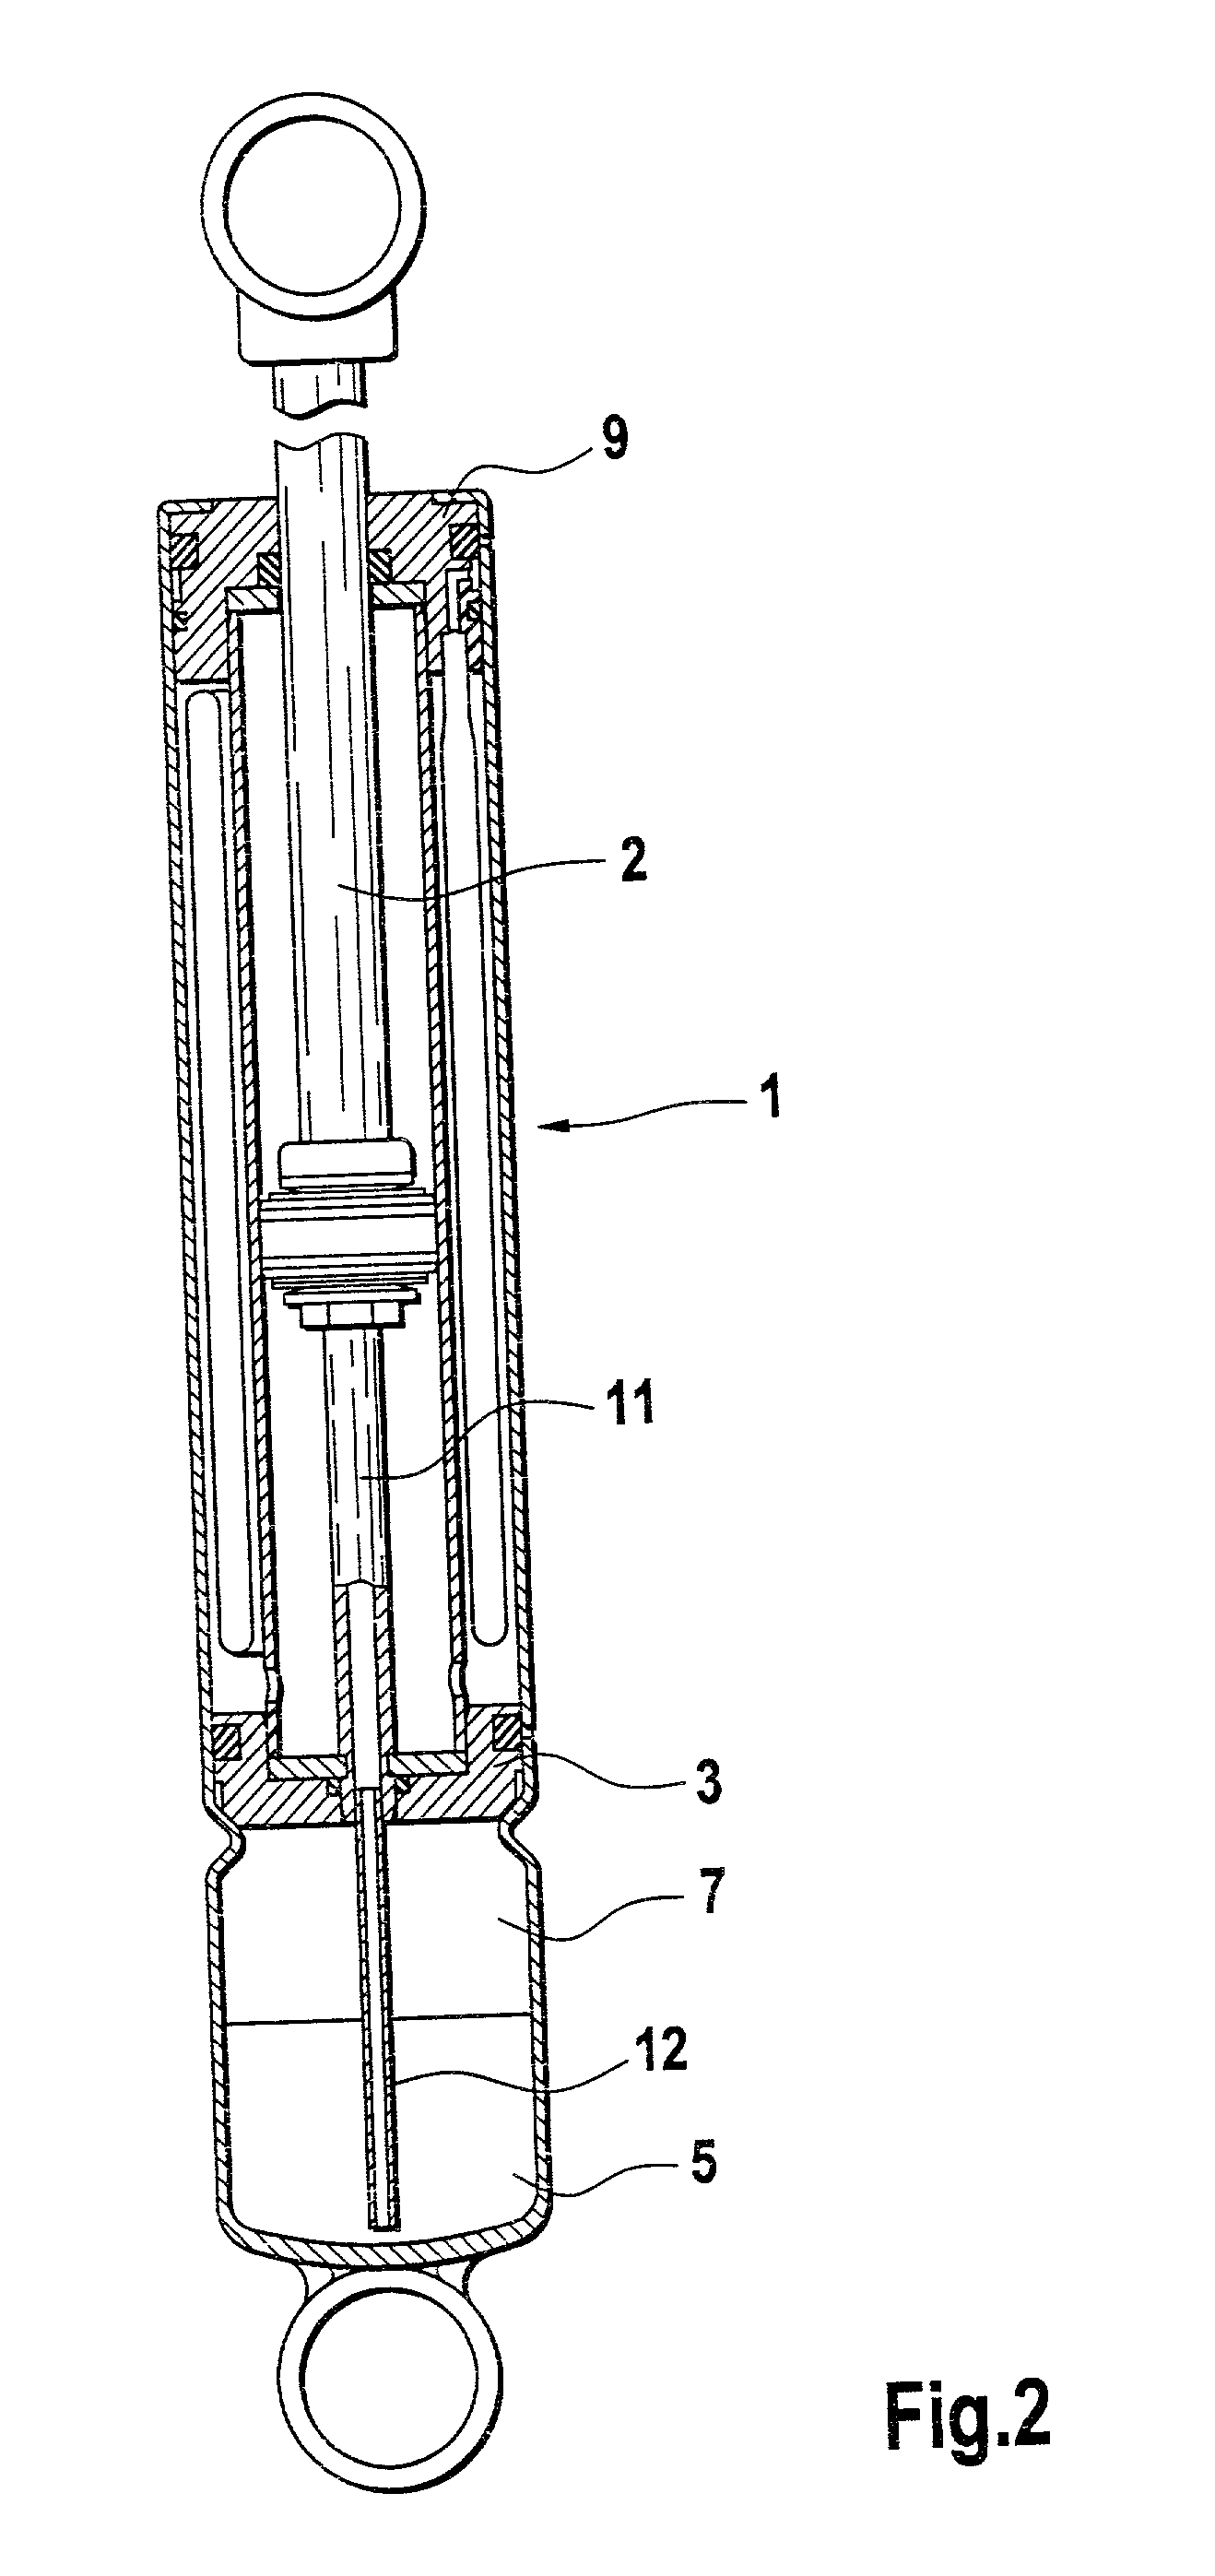 Self-pumping hydropneumatic suspension strut with internal ride-height control